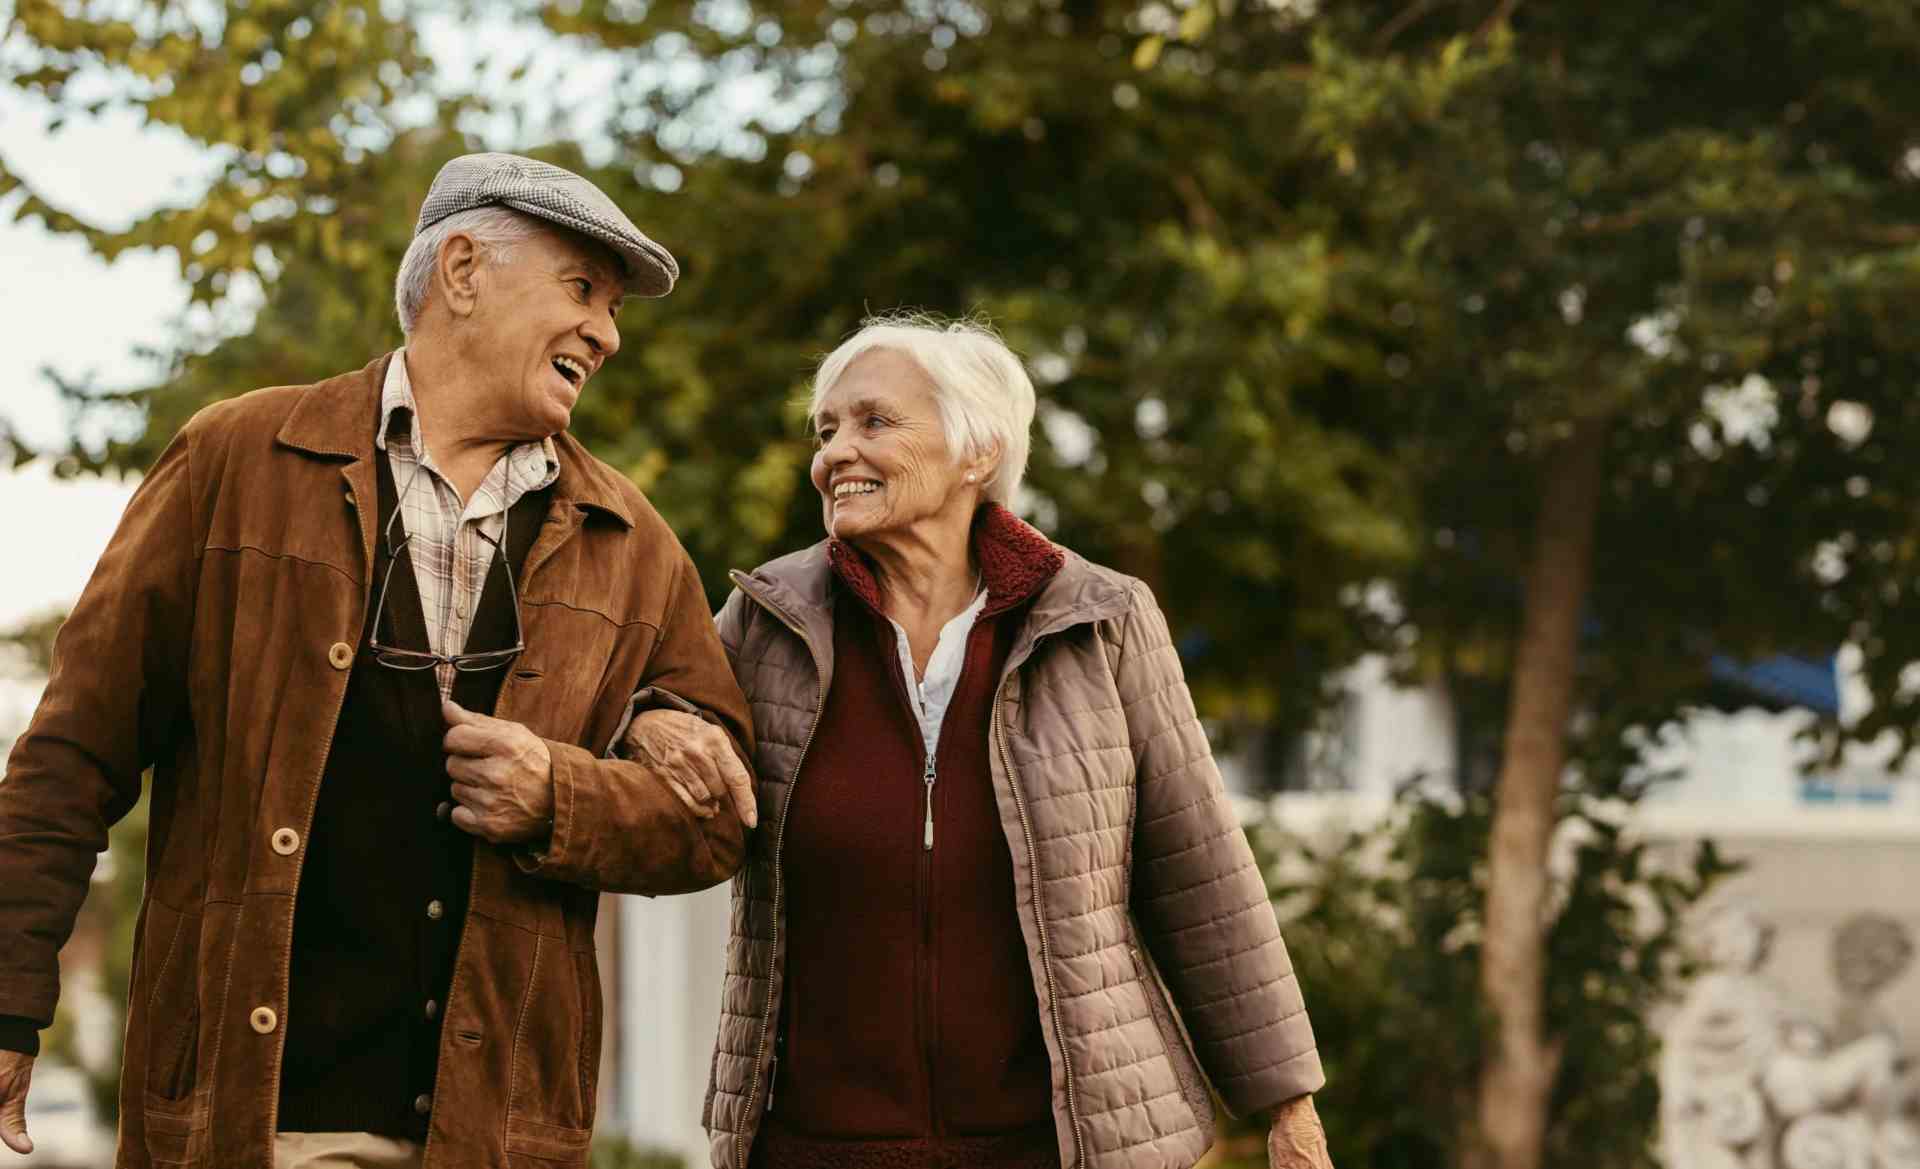 An elderly couple linking arms walking in a park